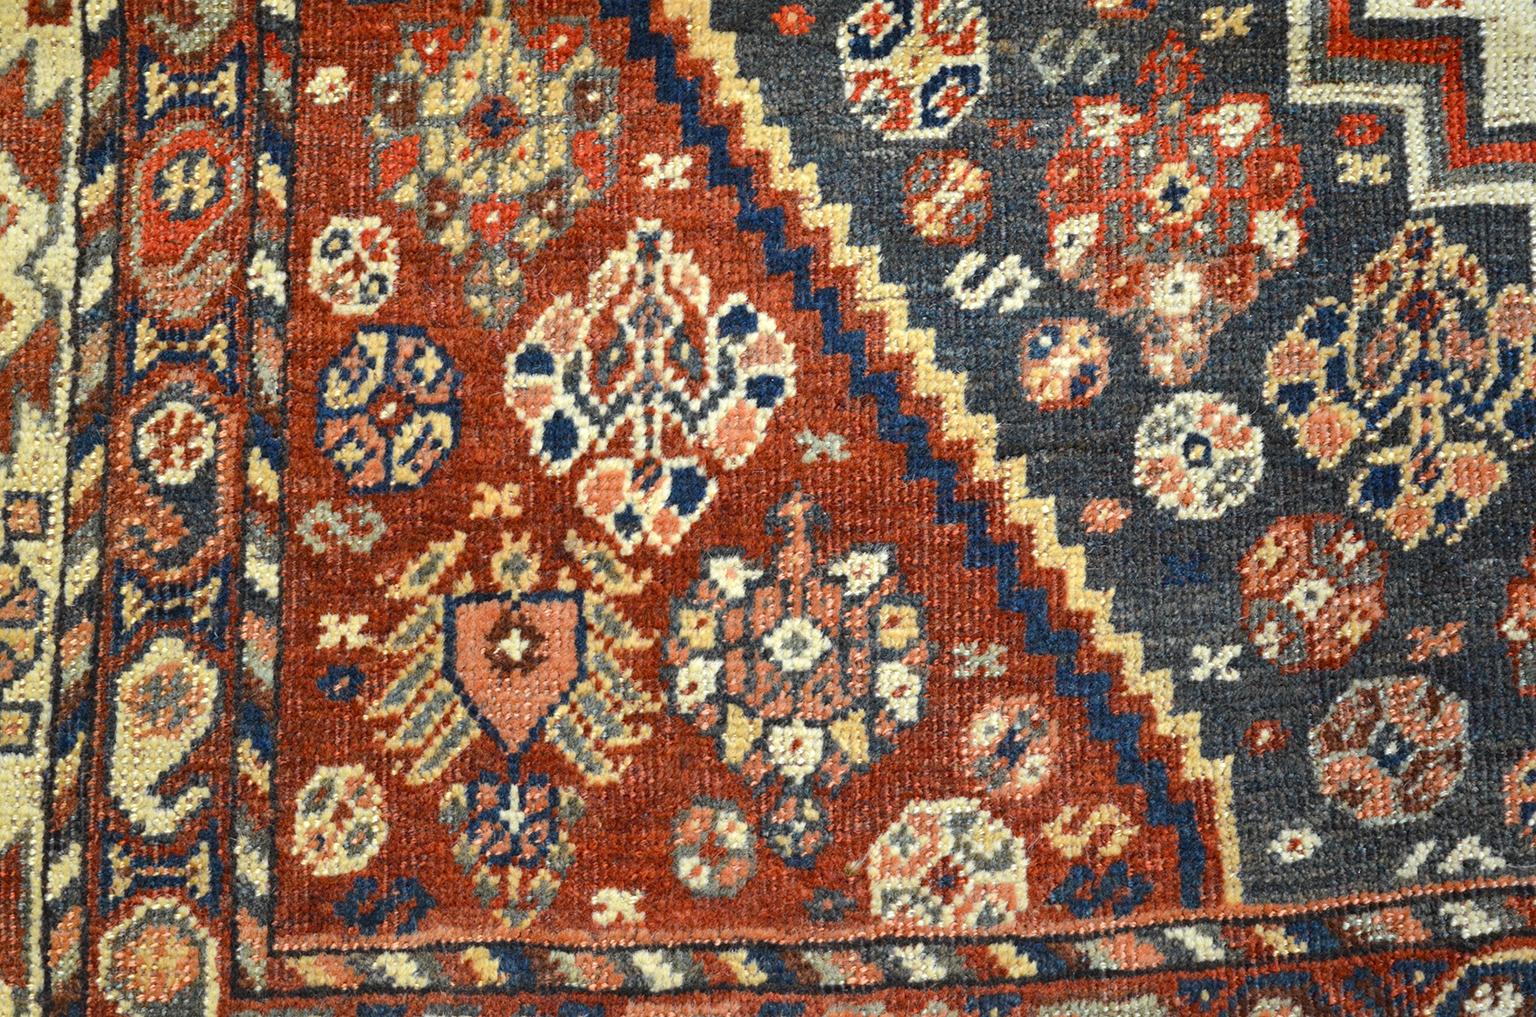 Antique 1880s Persian Qashqai Rug, 5' x 6' In Good Condition For Sale In New York, NY